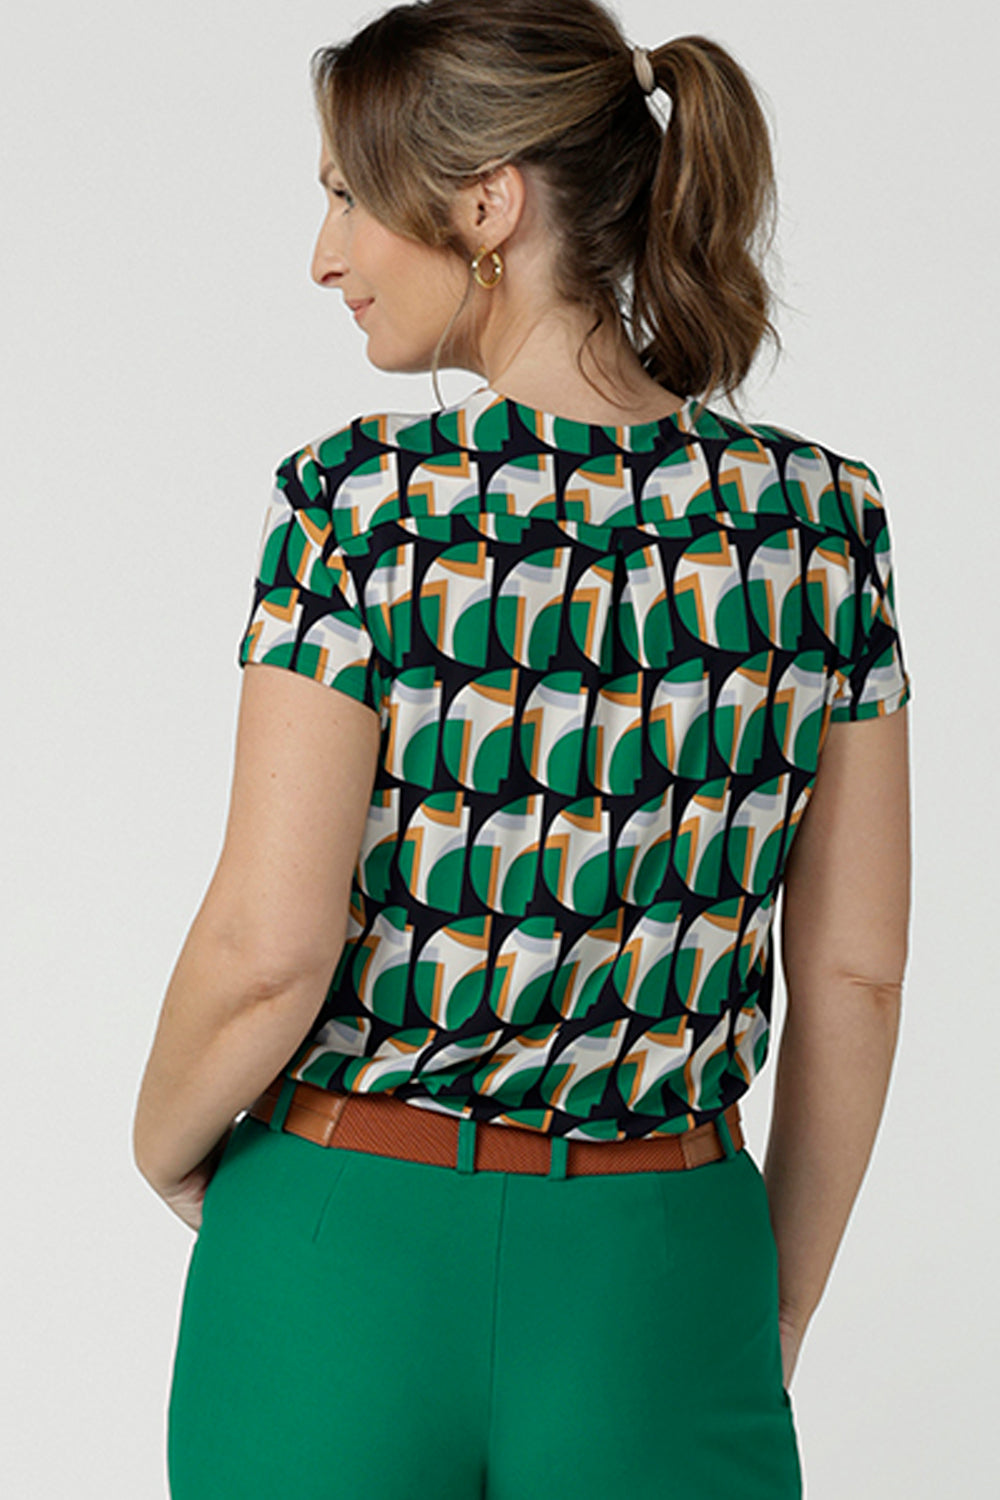 Back view of a size 10 woman wearing a v-neck short sleeve jersey top in a geometric print. She wears the top. Designed and made in Australia for petite to plus size women.